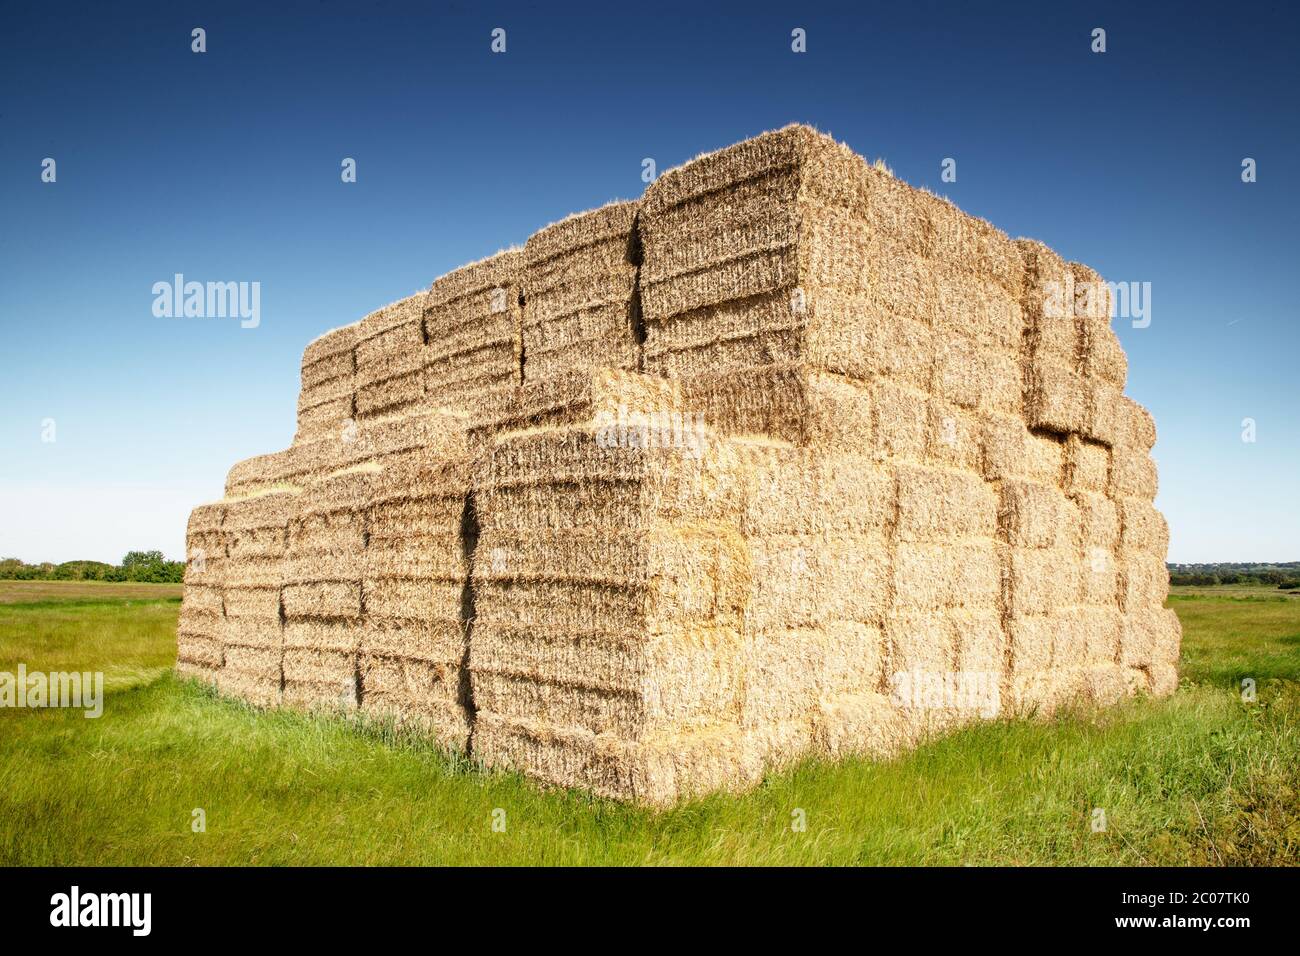 large haystack in a field set in the essex countryside of battlesbridge Stock Photo